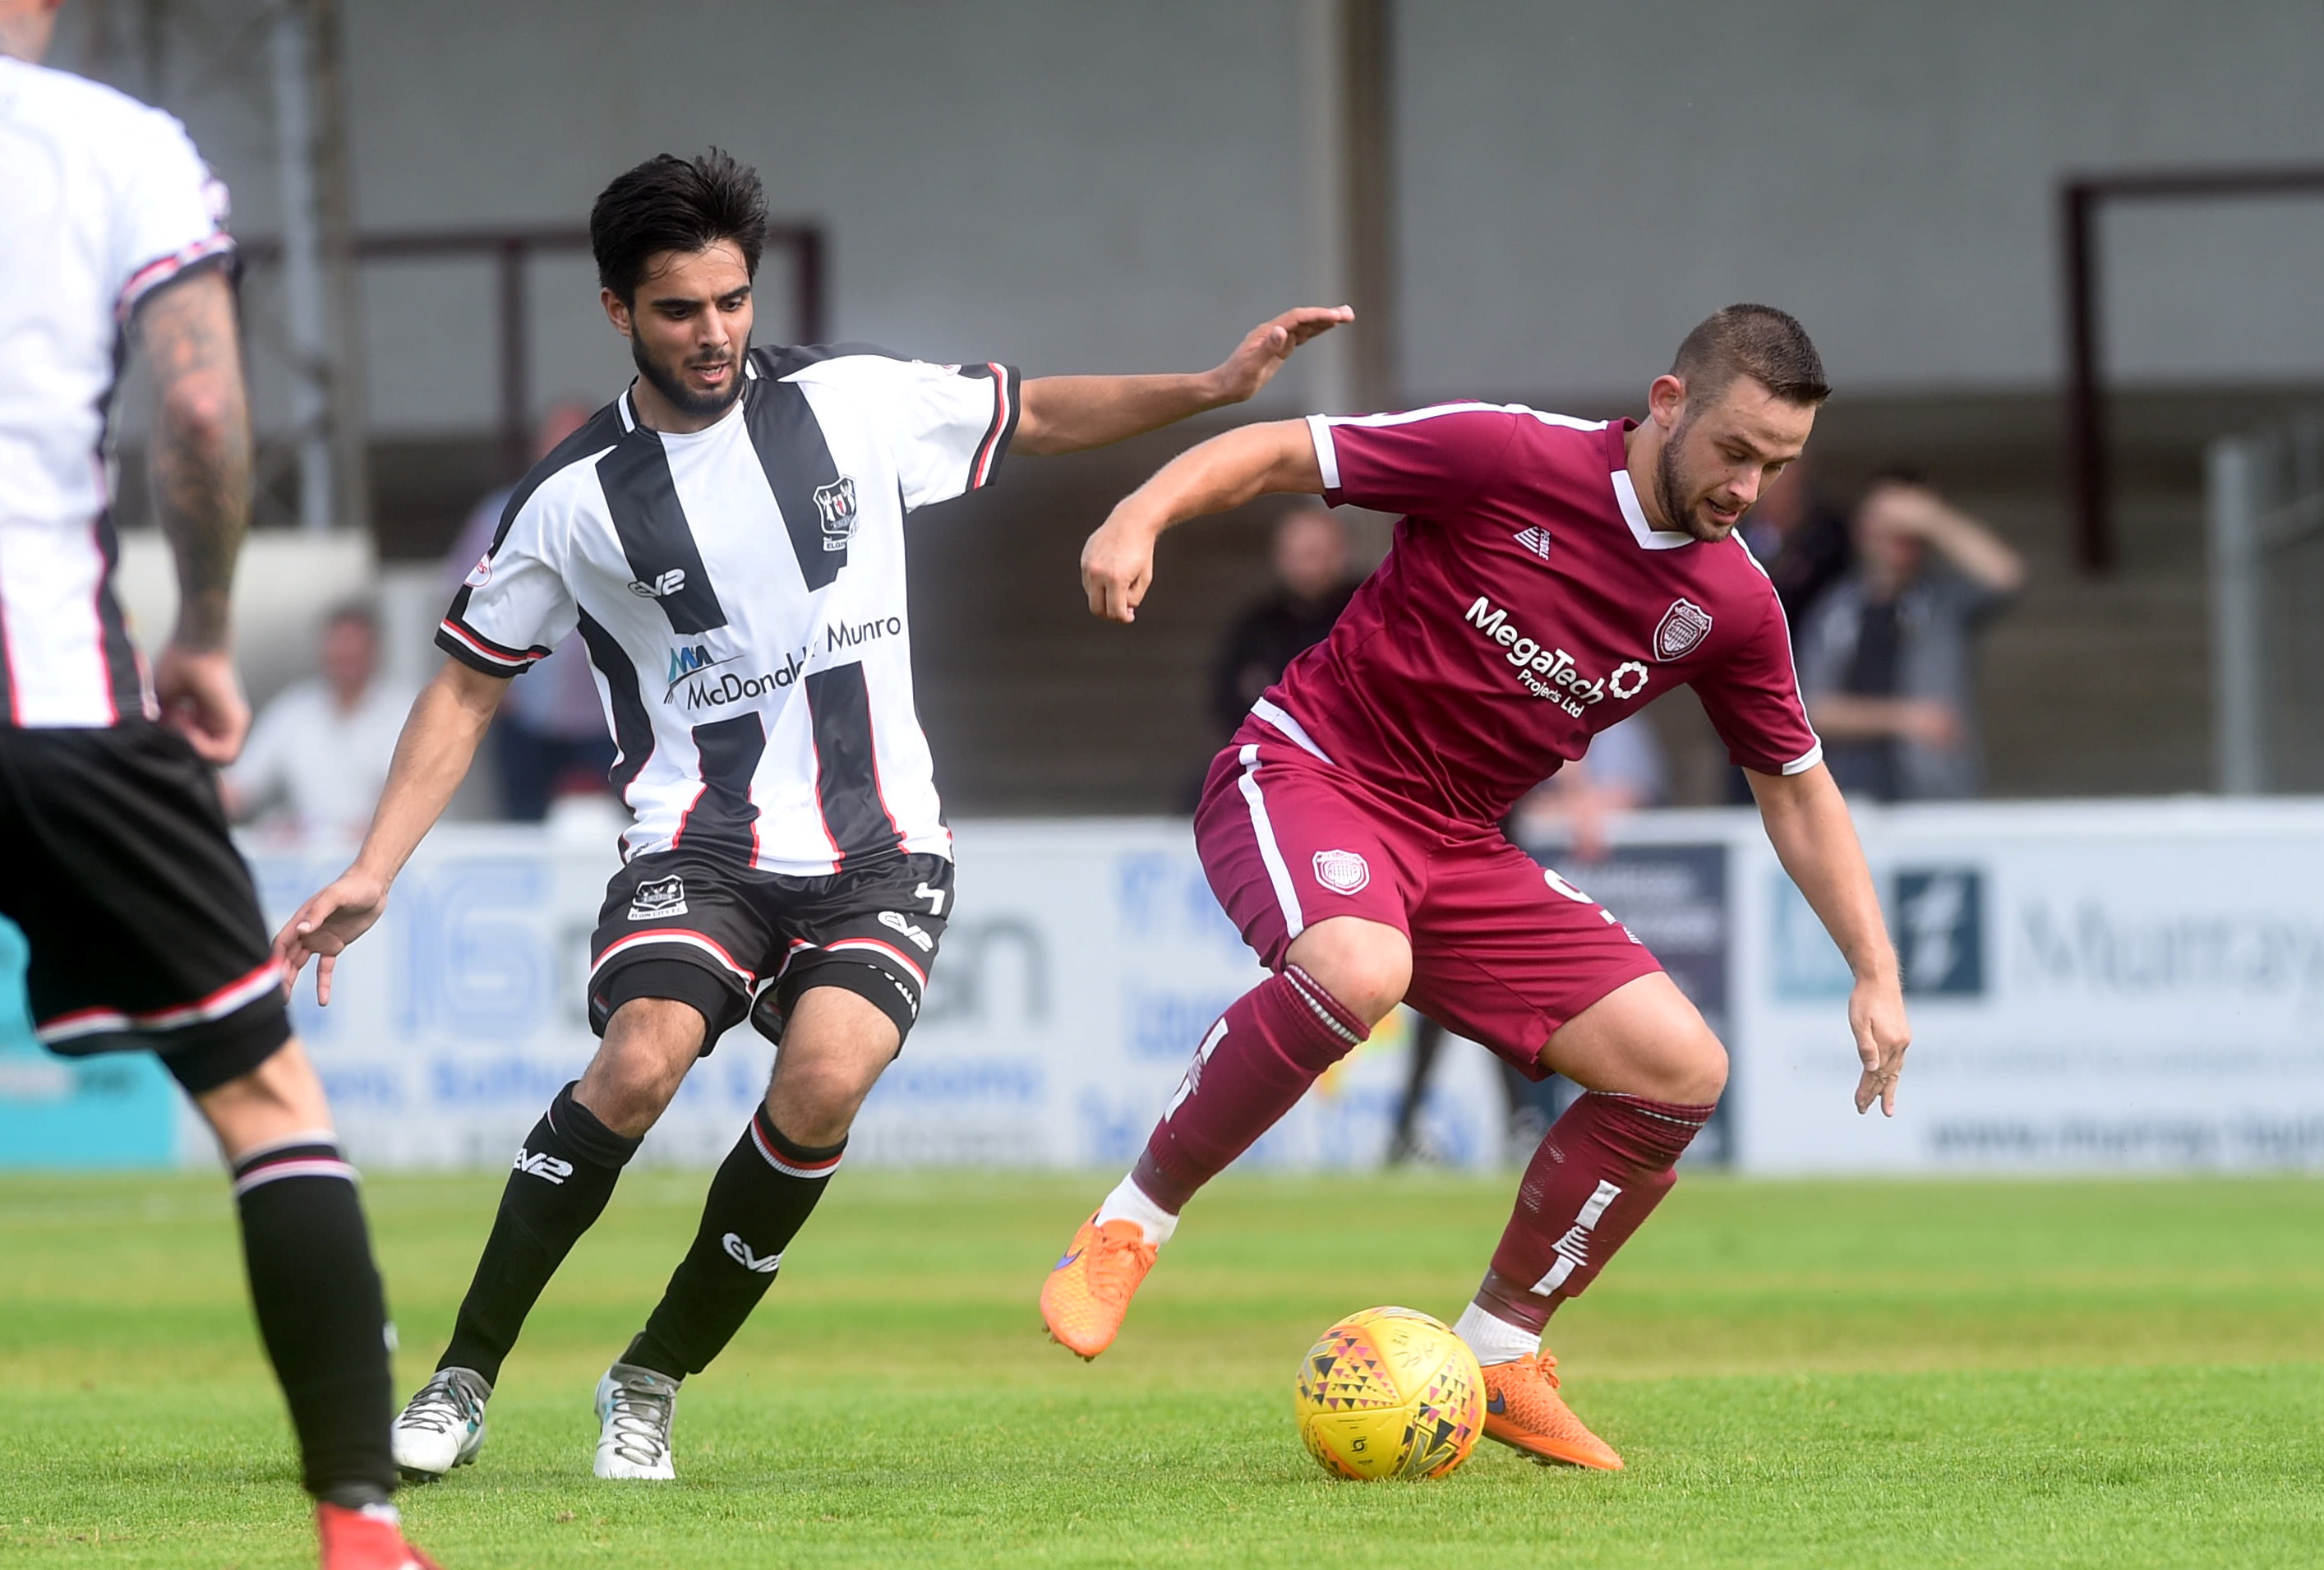 Betfred Cup
Arbroath v Elgin City
Gayfield Park, Arbroath
Pictured are Elgin's Rabin Omar and Arbroath's Ryan Wallace
Picture by DARRELL BENNS    
Pictured on 21/07/2018